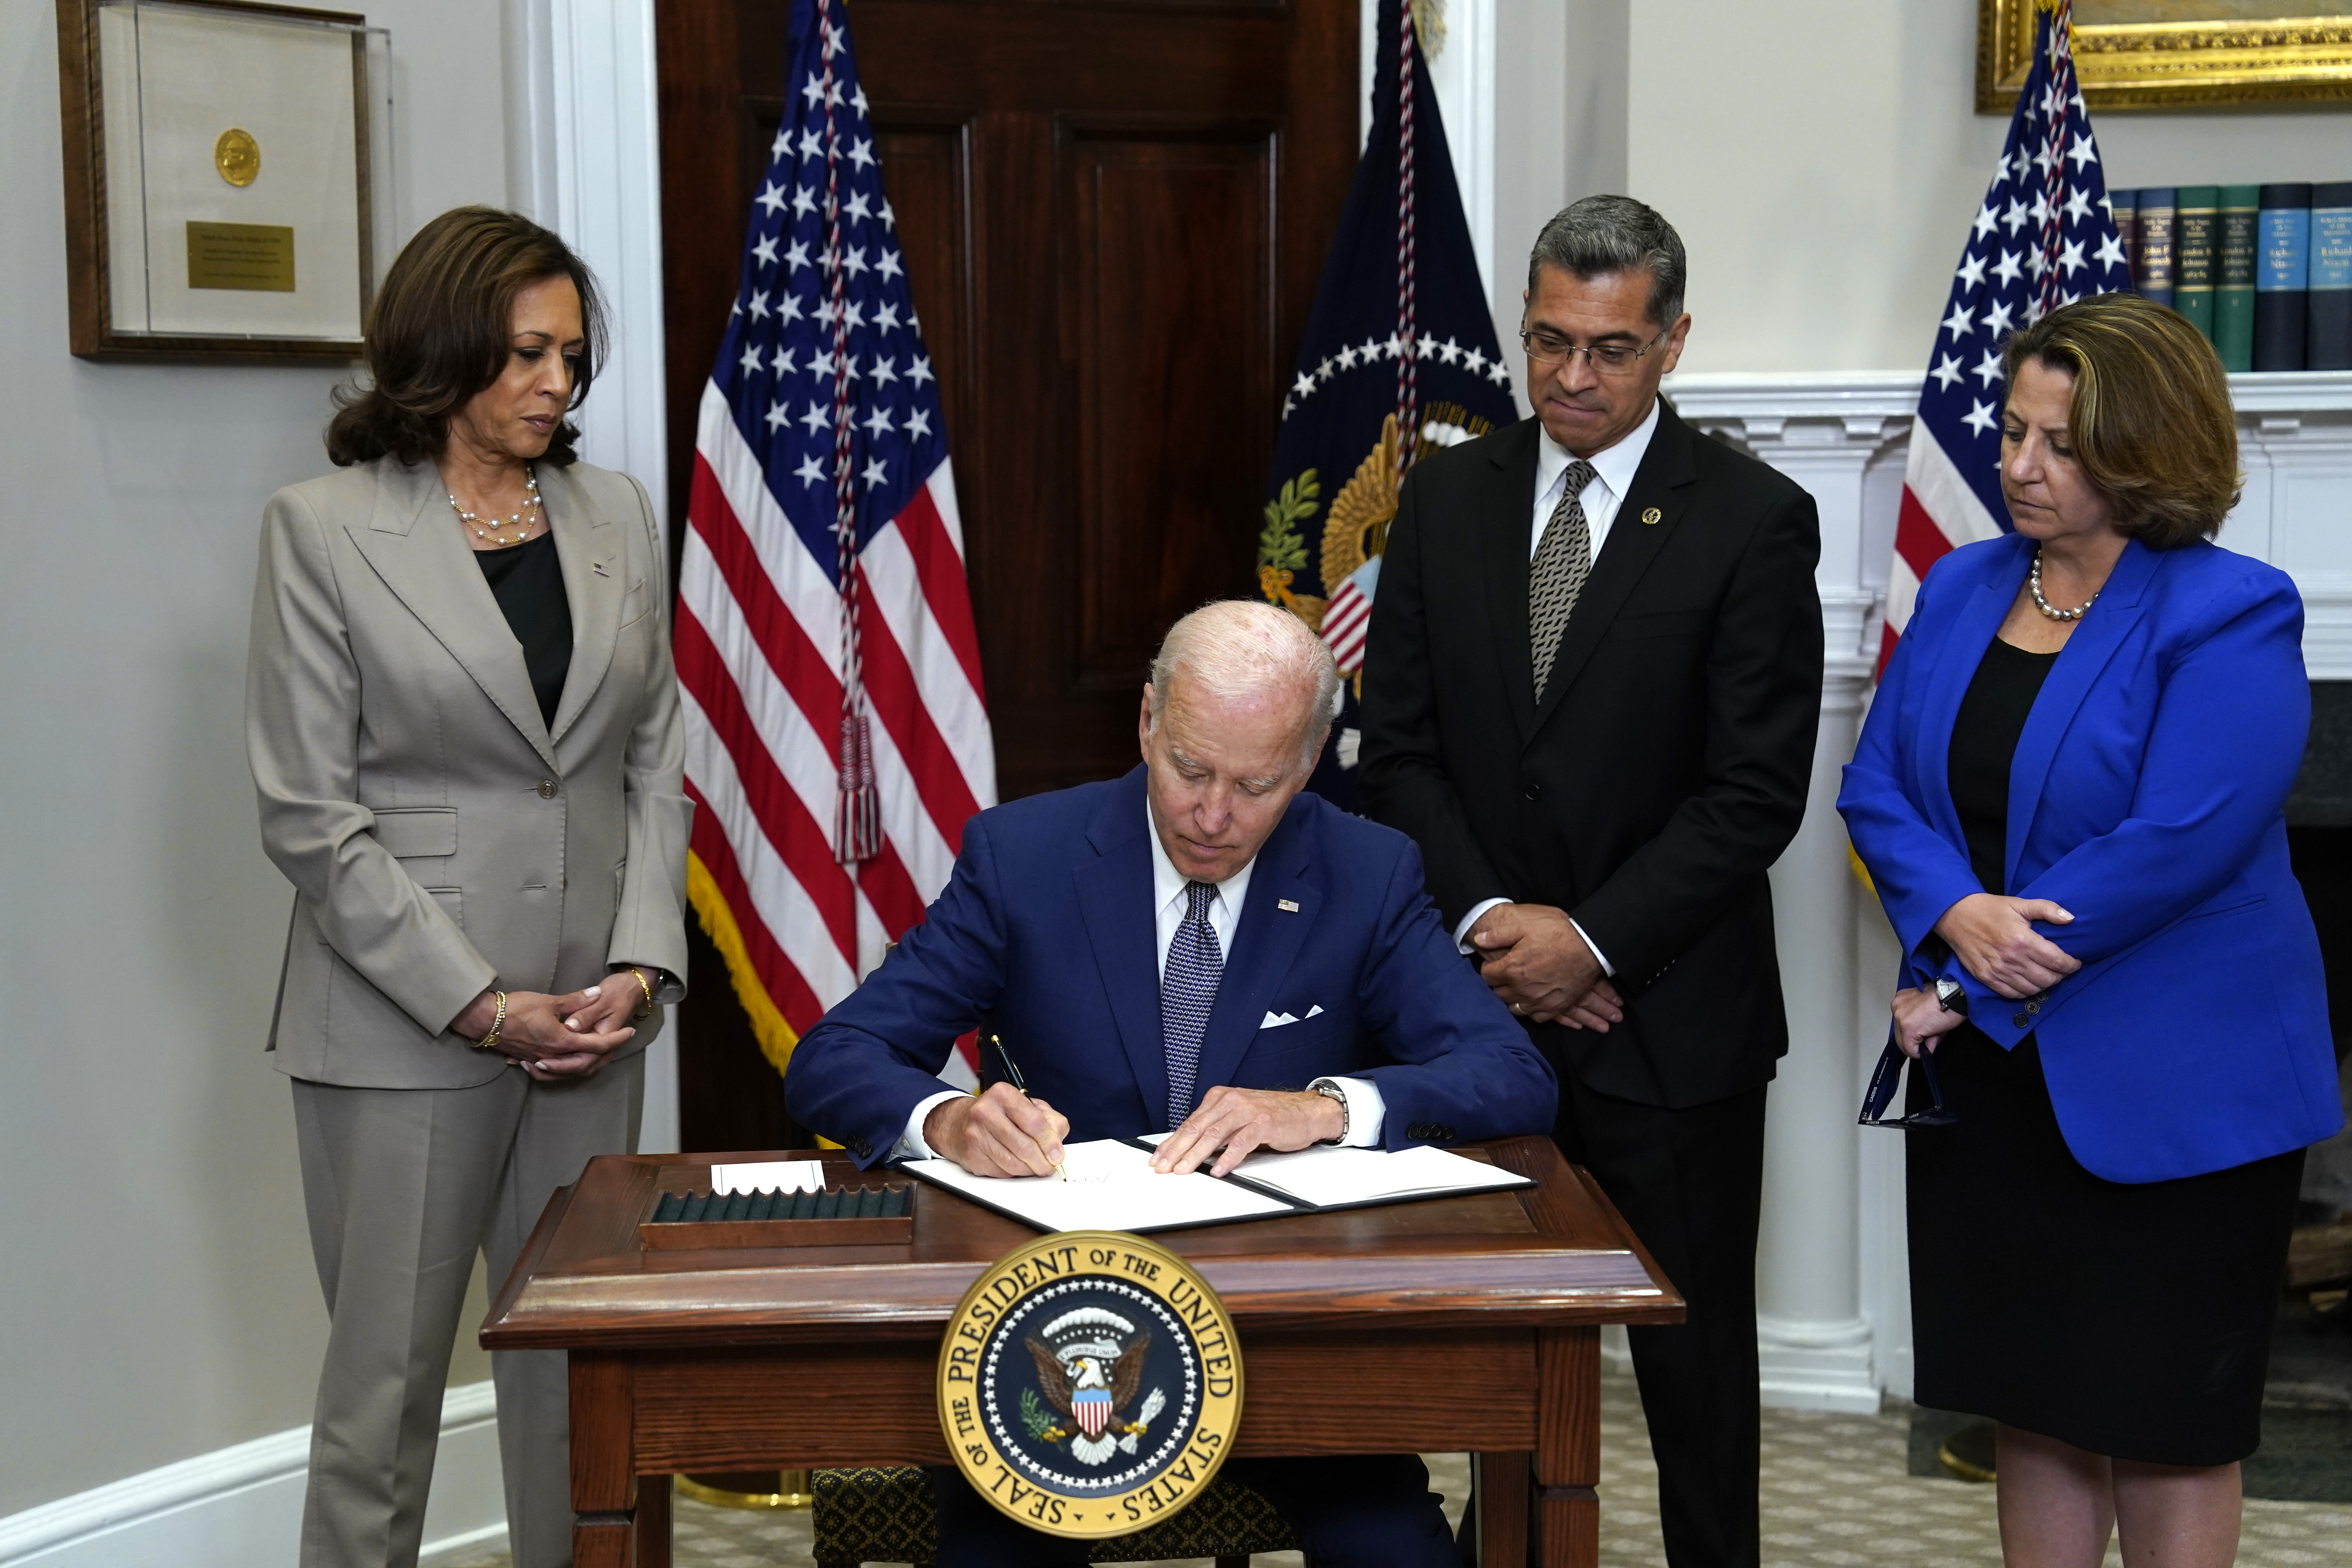 President Biden sits and signs at a desk, while Vice President Kamala Harris, 